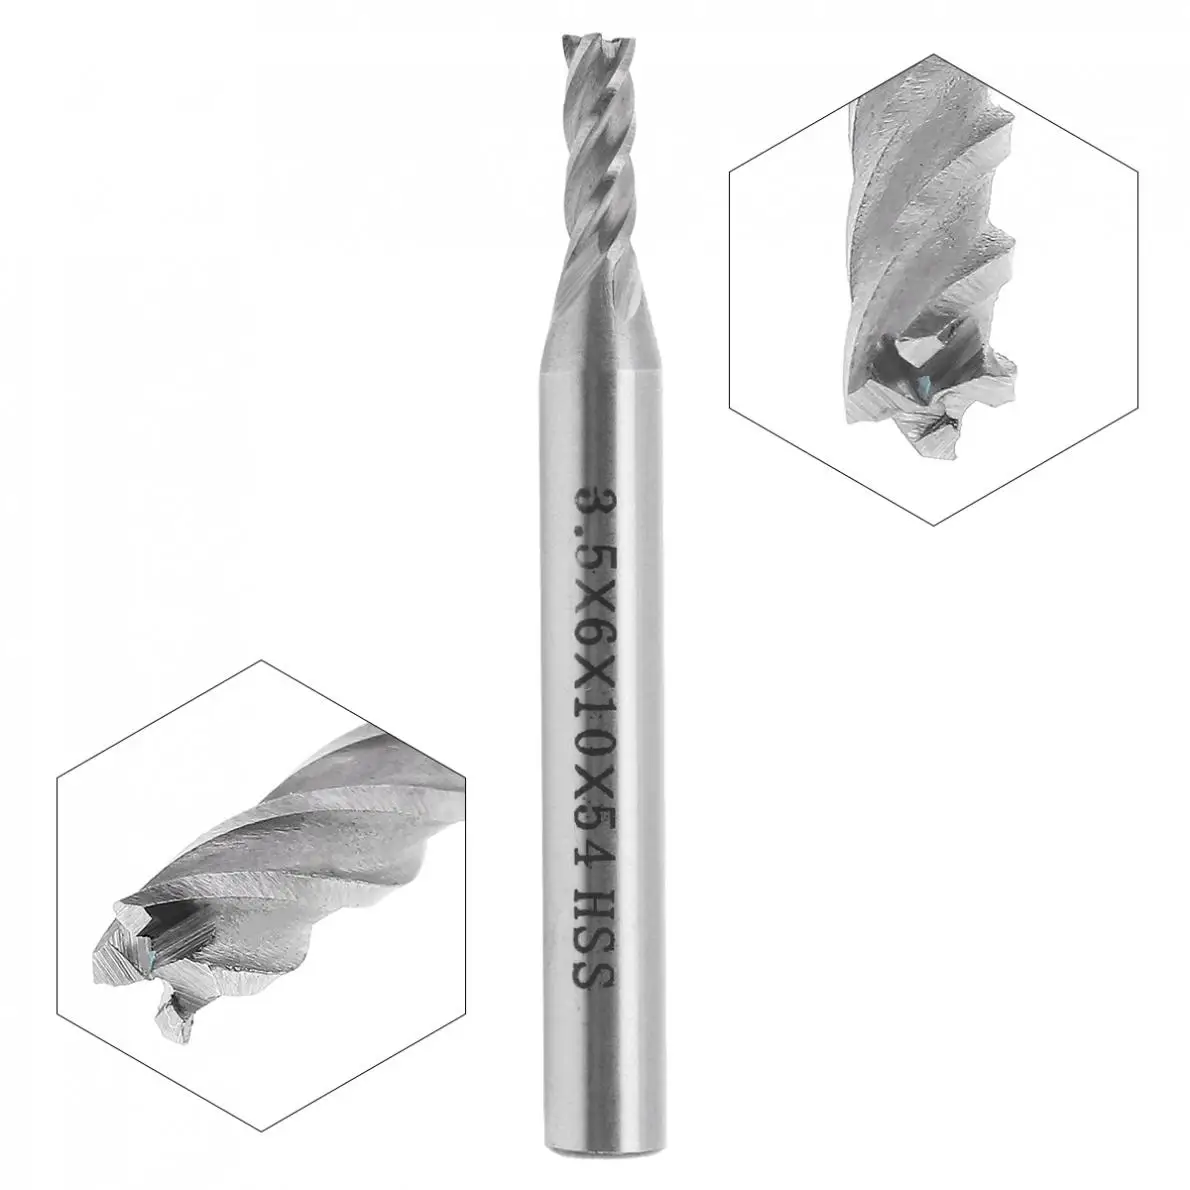 

3.5mm 4 Flute HSS & Aluminum End Mill Cutter with Super Hard Straight Shank for CNC Mold Processing Cutting